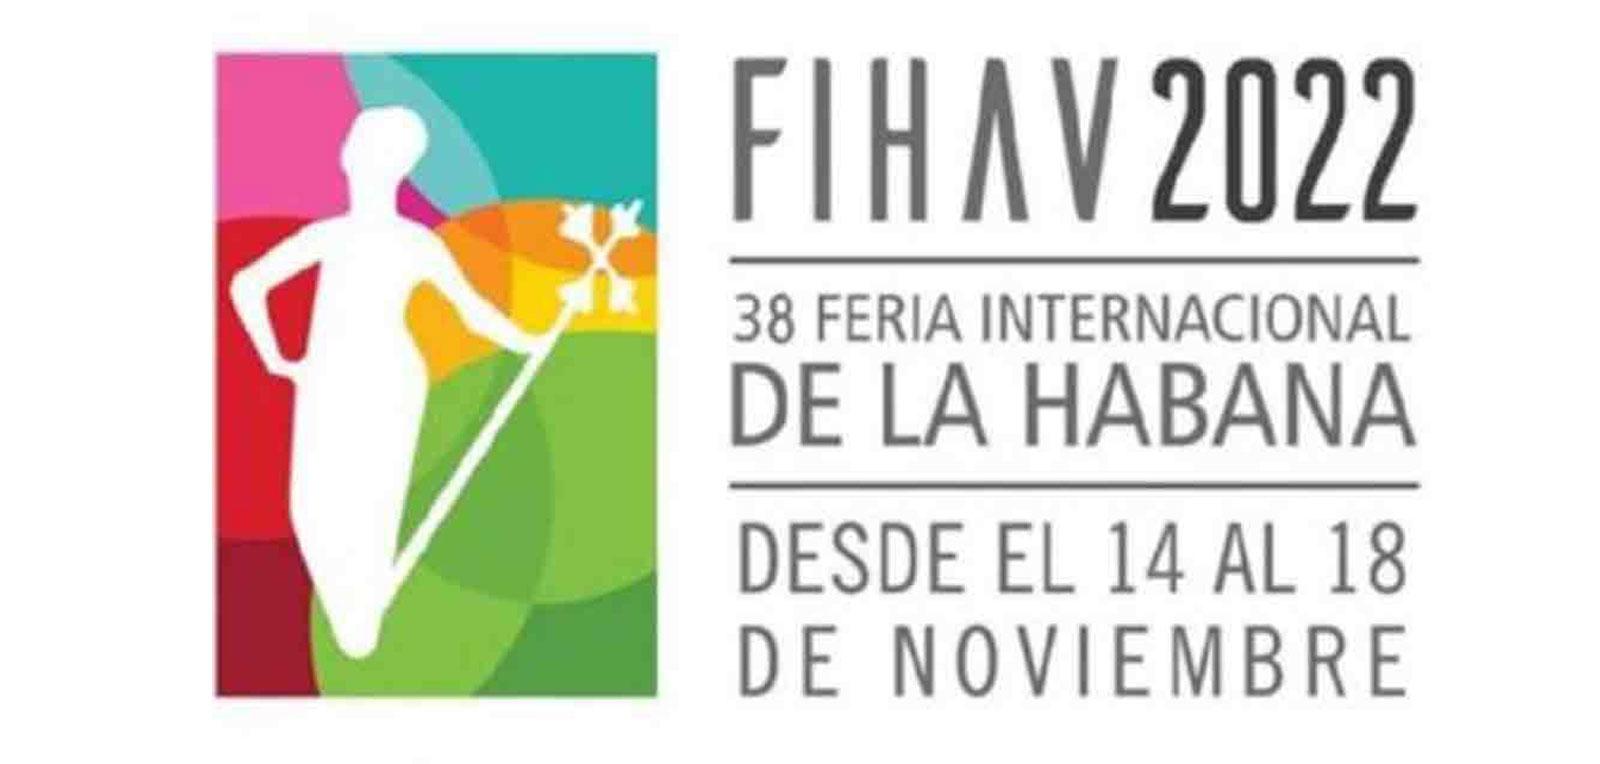 Chamber of Commerce of Cuba to promote new business at Fihav 2022